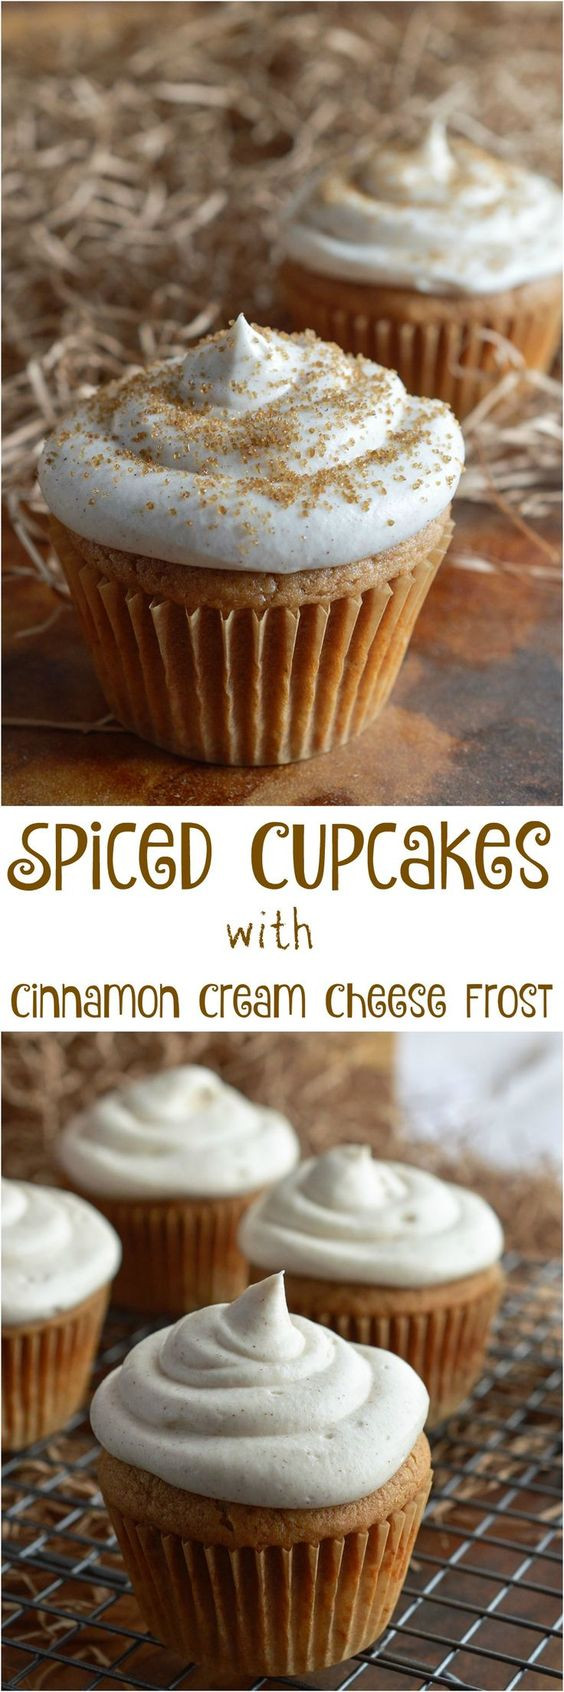 Good Fall Desserts
 Fall desserts Cream cheese frosting and Cream on Pinterest